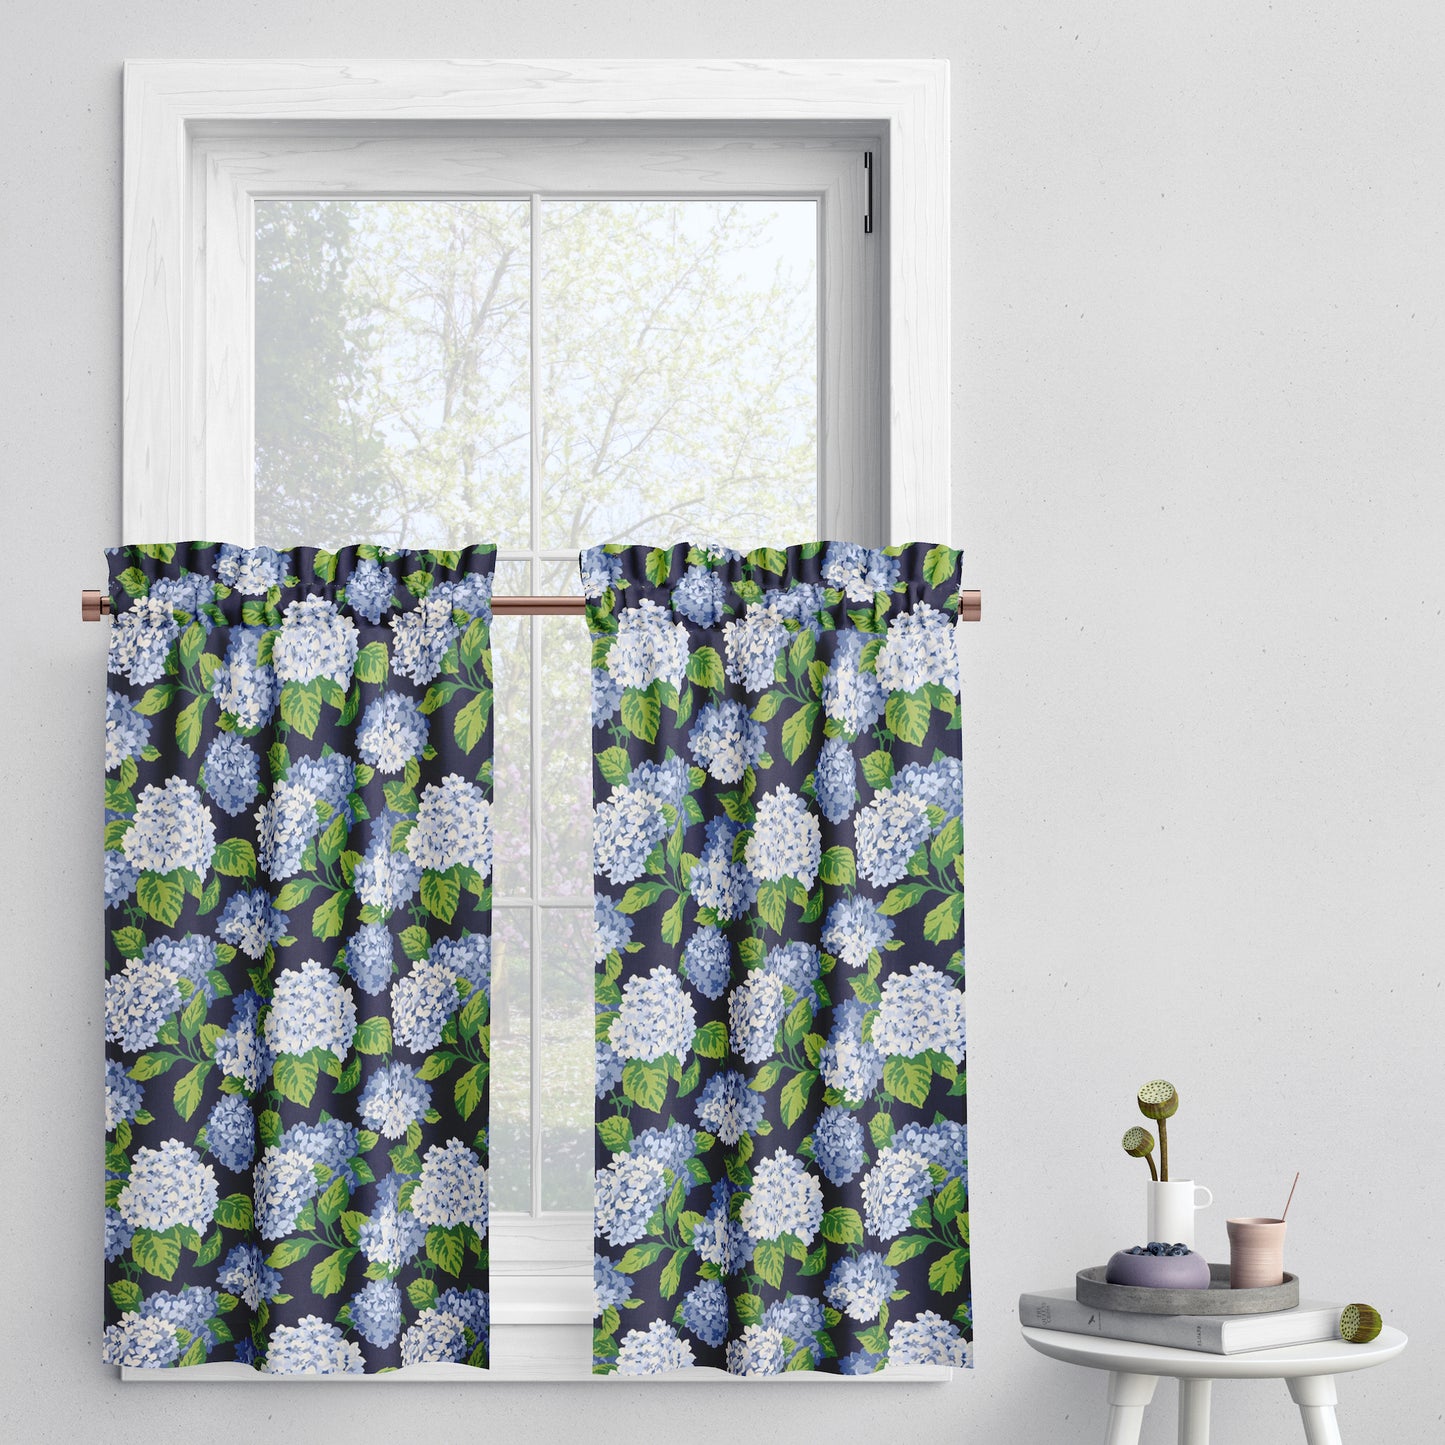 Tailored Tier Curtains in Summerwind Navy Blue Hydrangea Floral, Large Scale